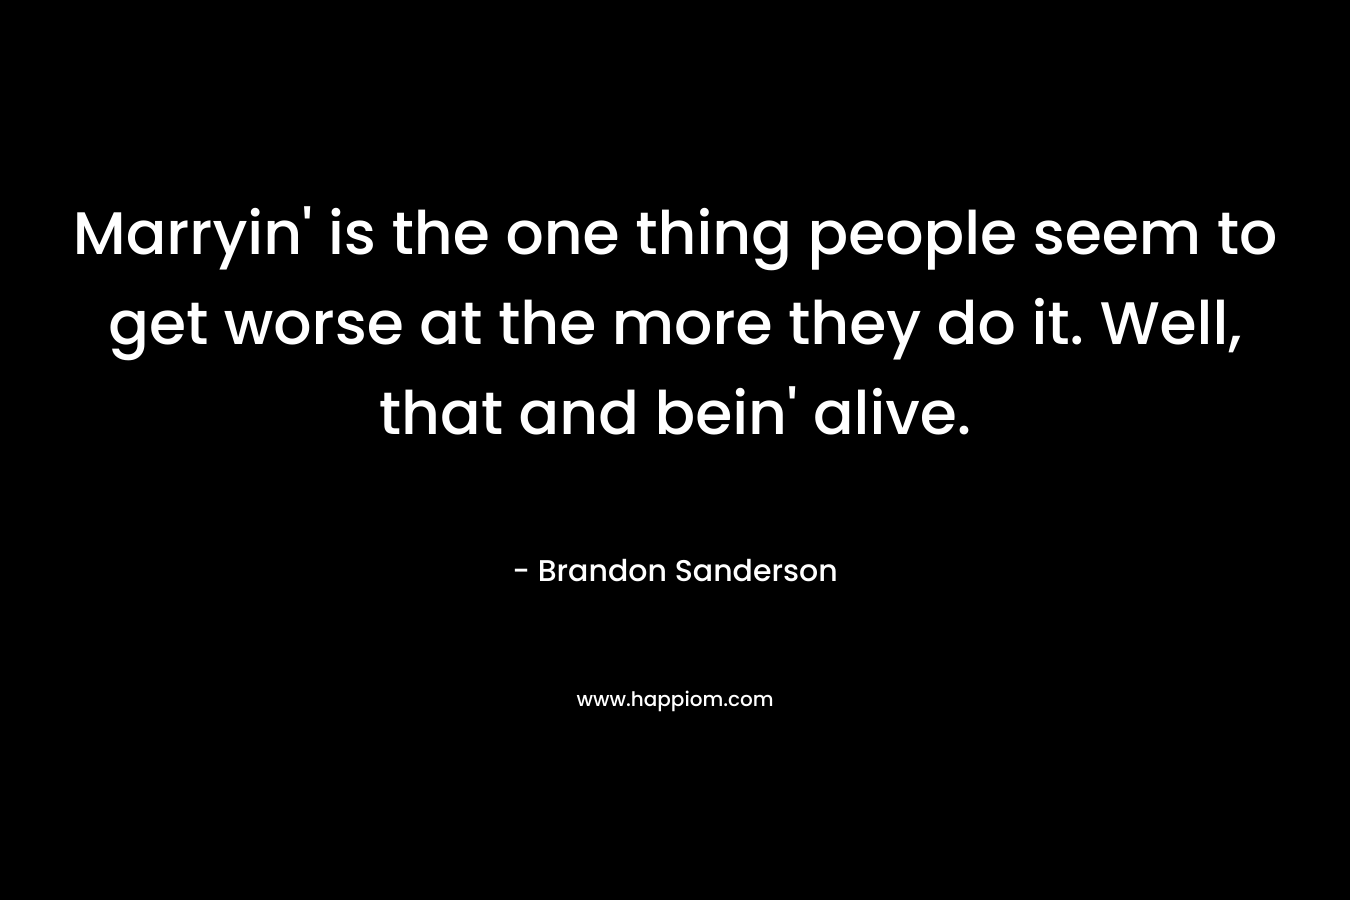 Marryin’ is the one thing people seem to get worse at the more they do it. Well, that and bein’ alive. – Brandon Sanderson